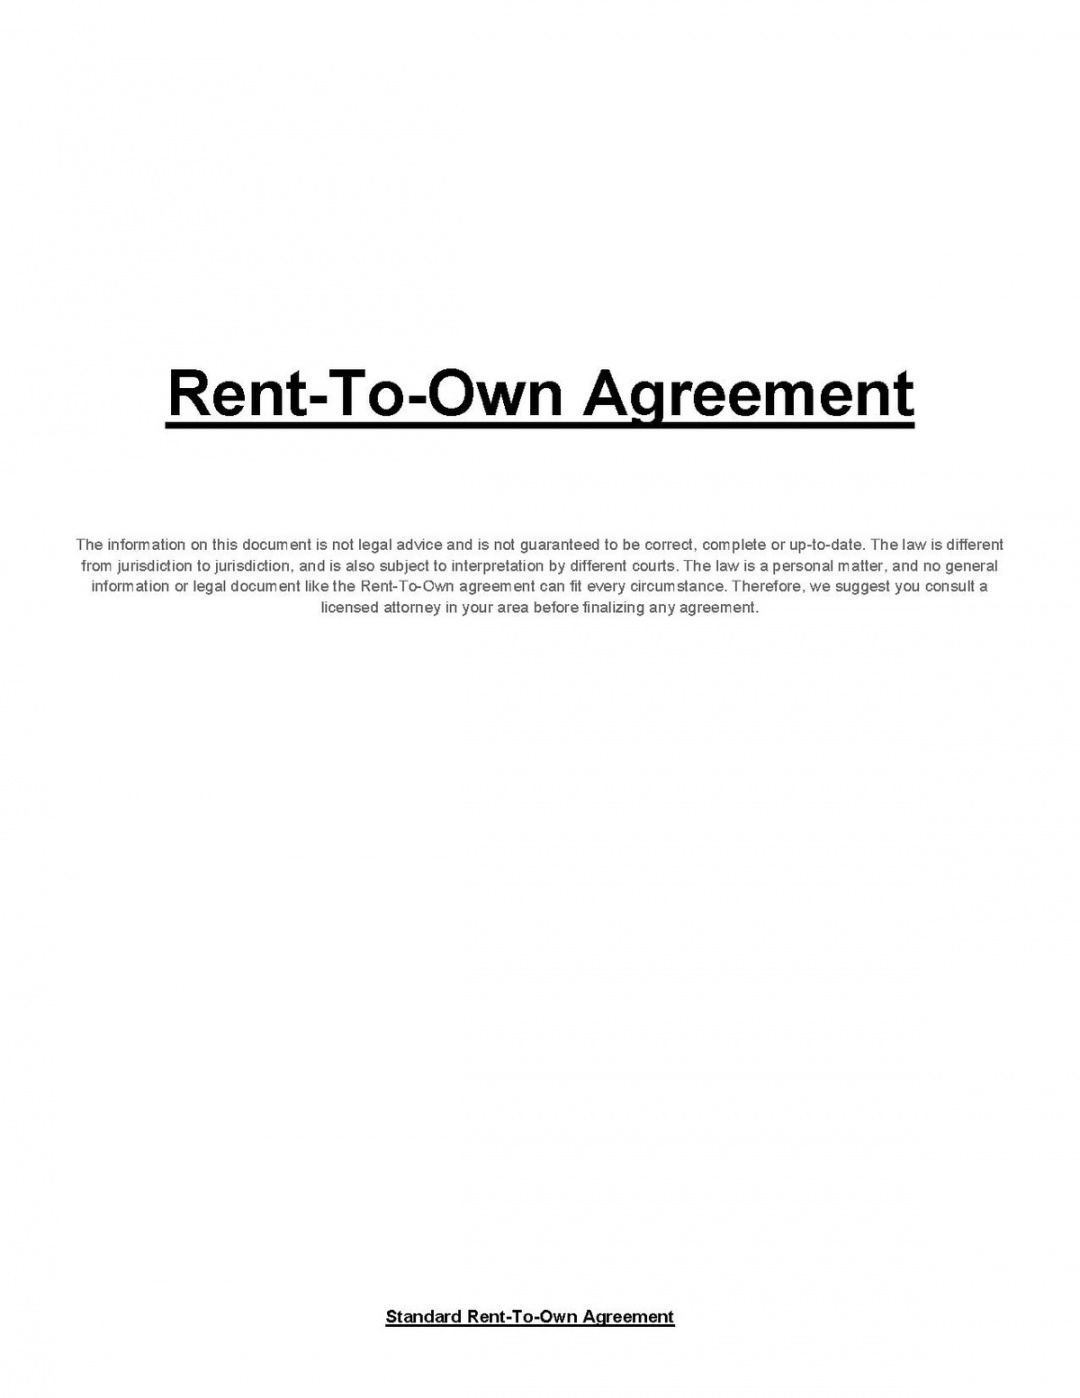 Rent To Own Agreement Sample Lease Purchase Contract Wikipedia Home Rent To Own Agreement